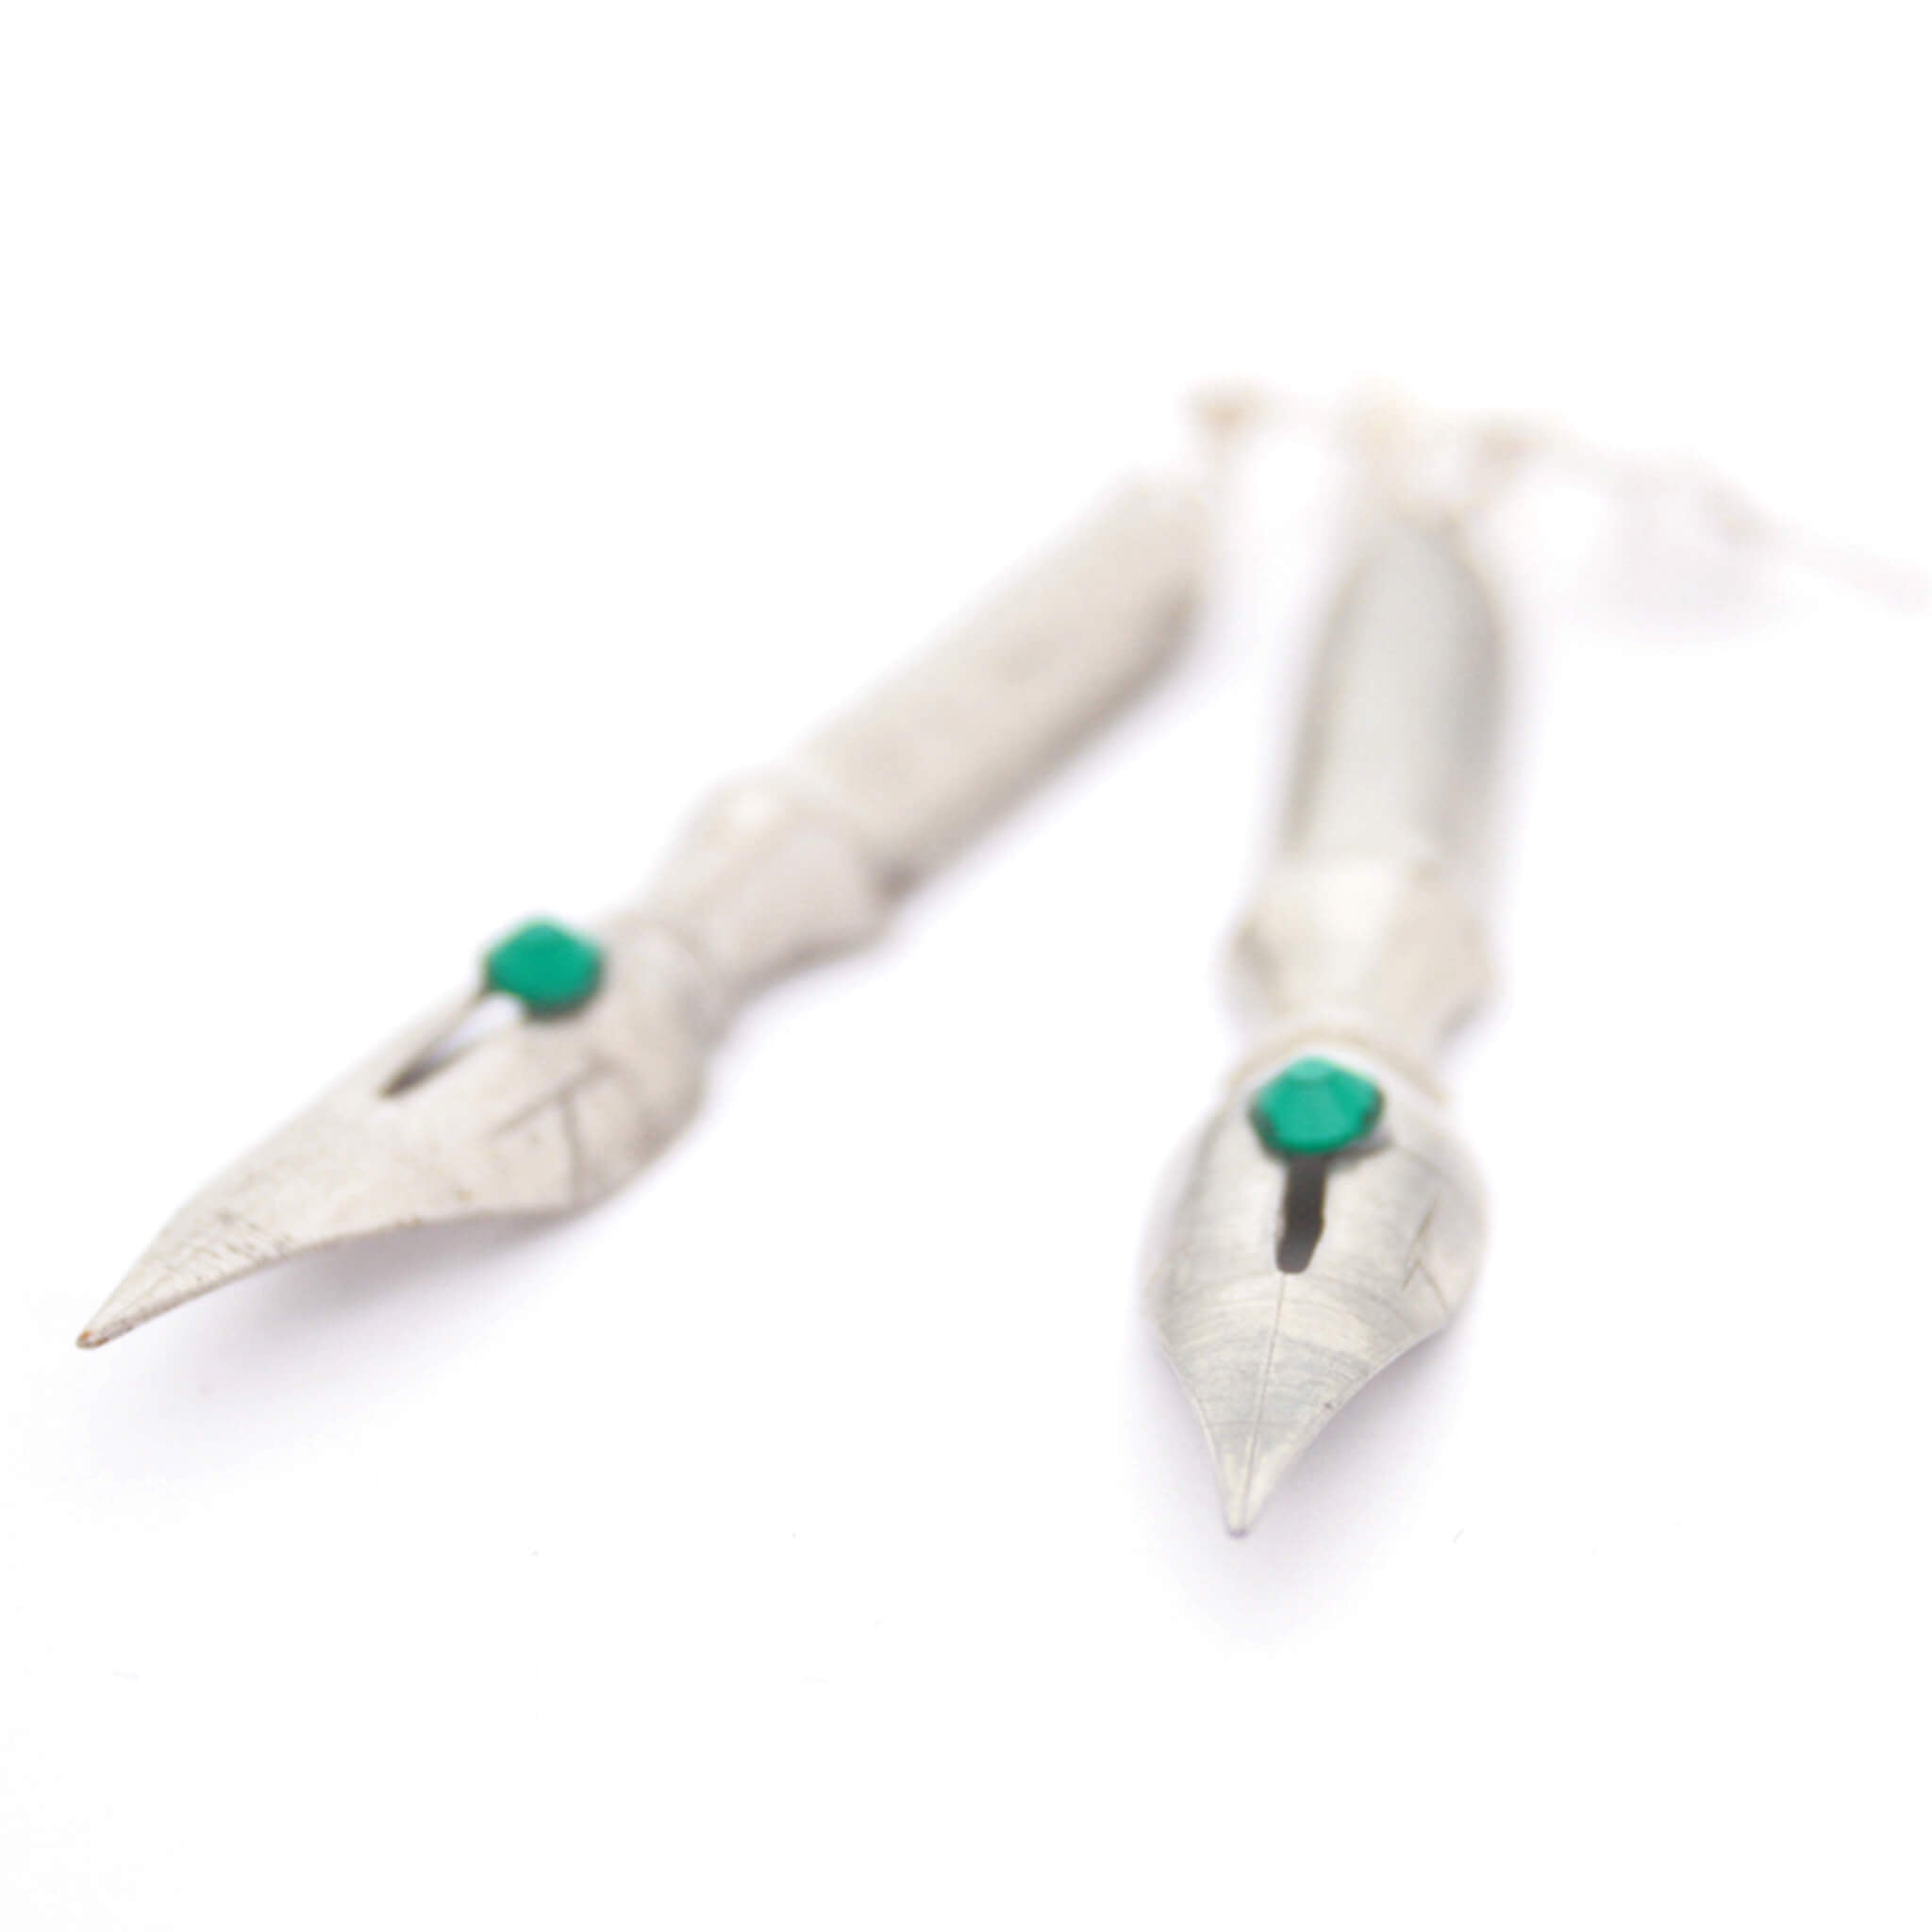 pen nib earrings with emerald birthstone crystals on them lying on a white paper